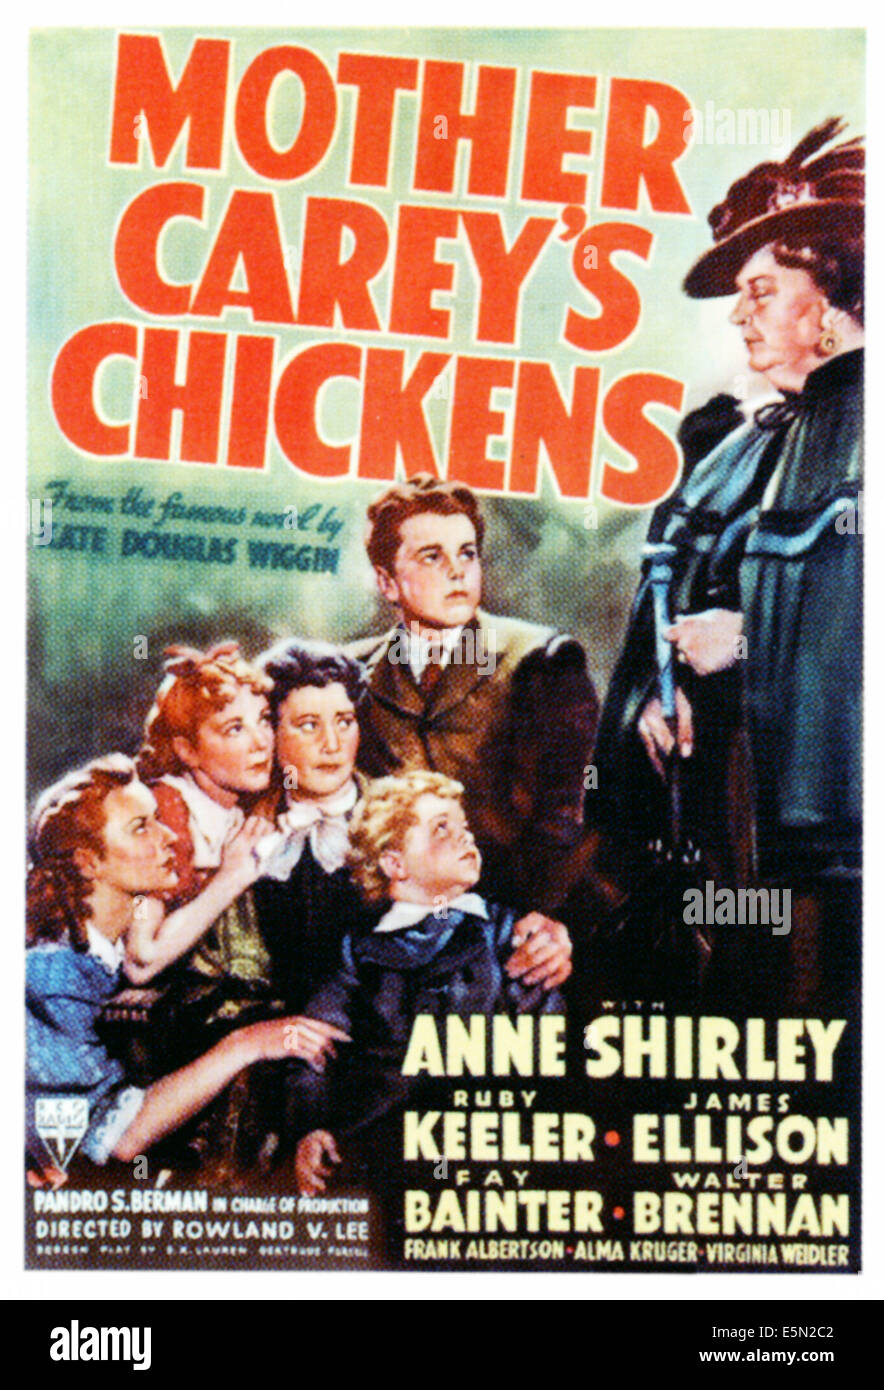 MOTHER CAREY'S CHICKENS, far left: Anne Shirley, 3rd from left: Fay Bainter, Donnie Dunagan, Jackie Moran on poster art, 1938 Stock Photo